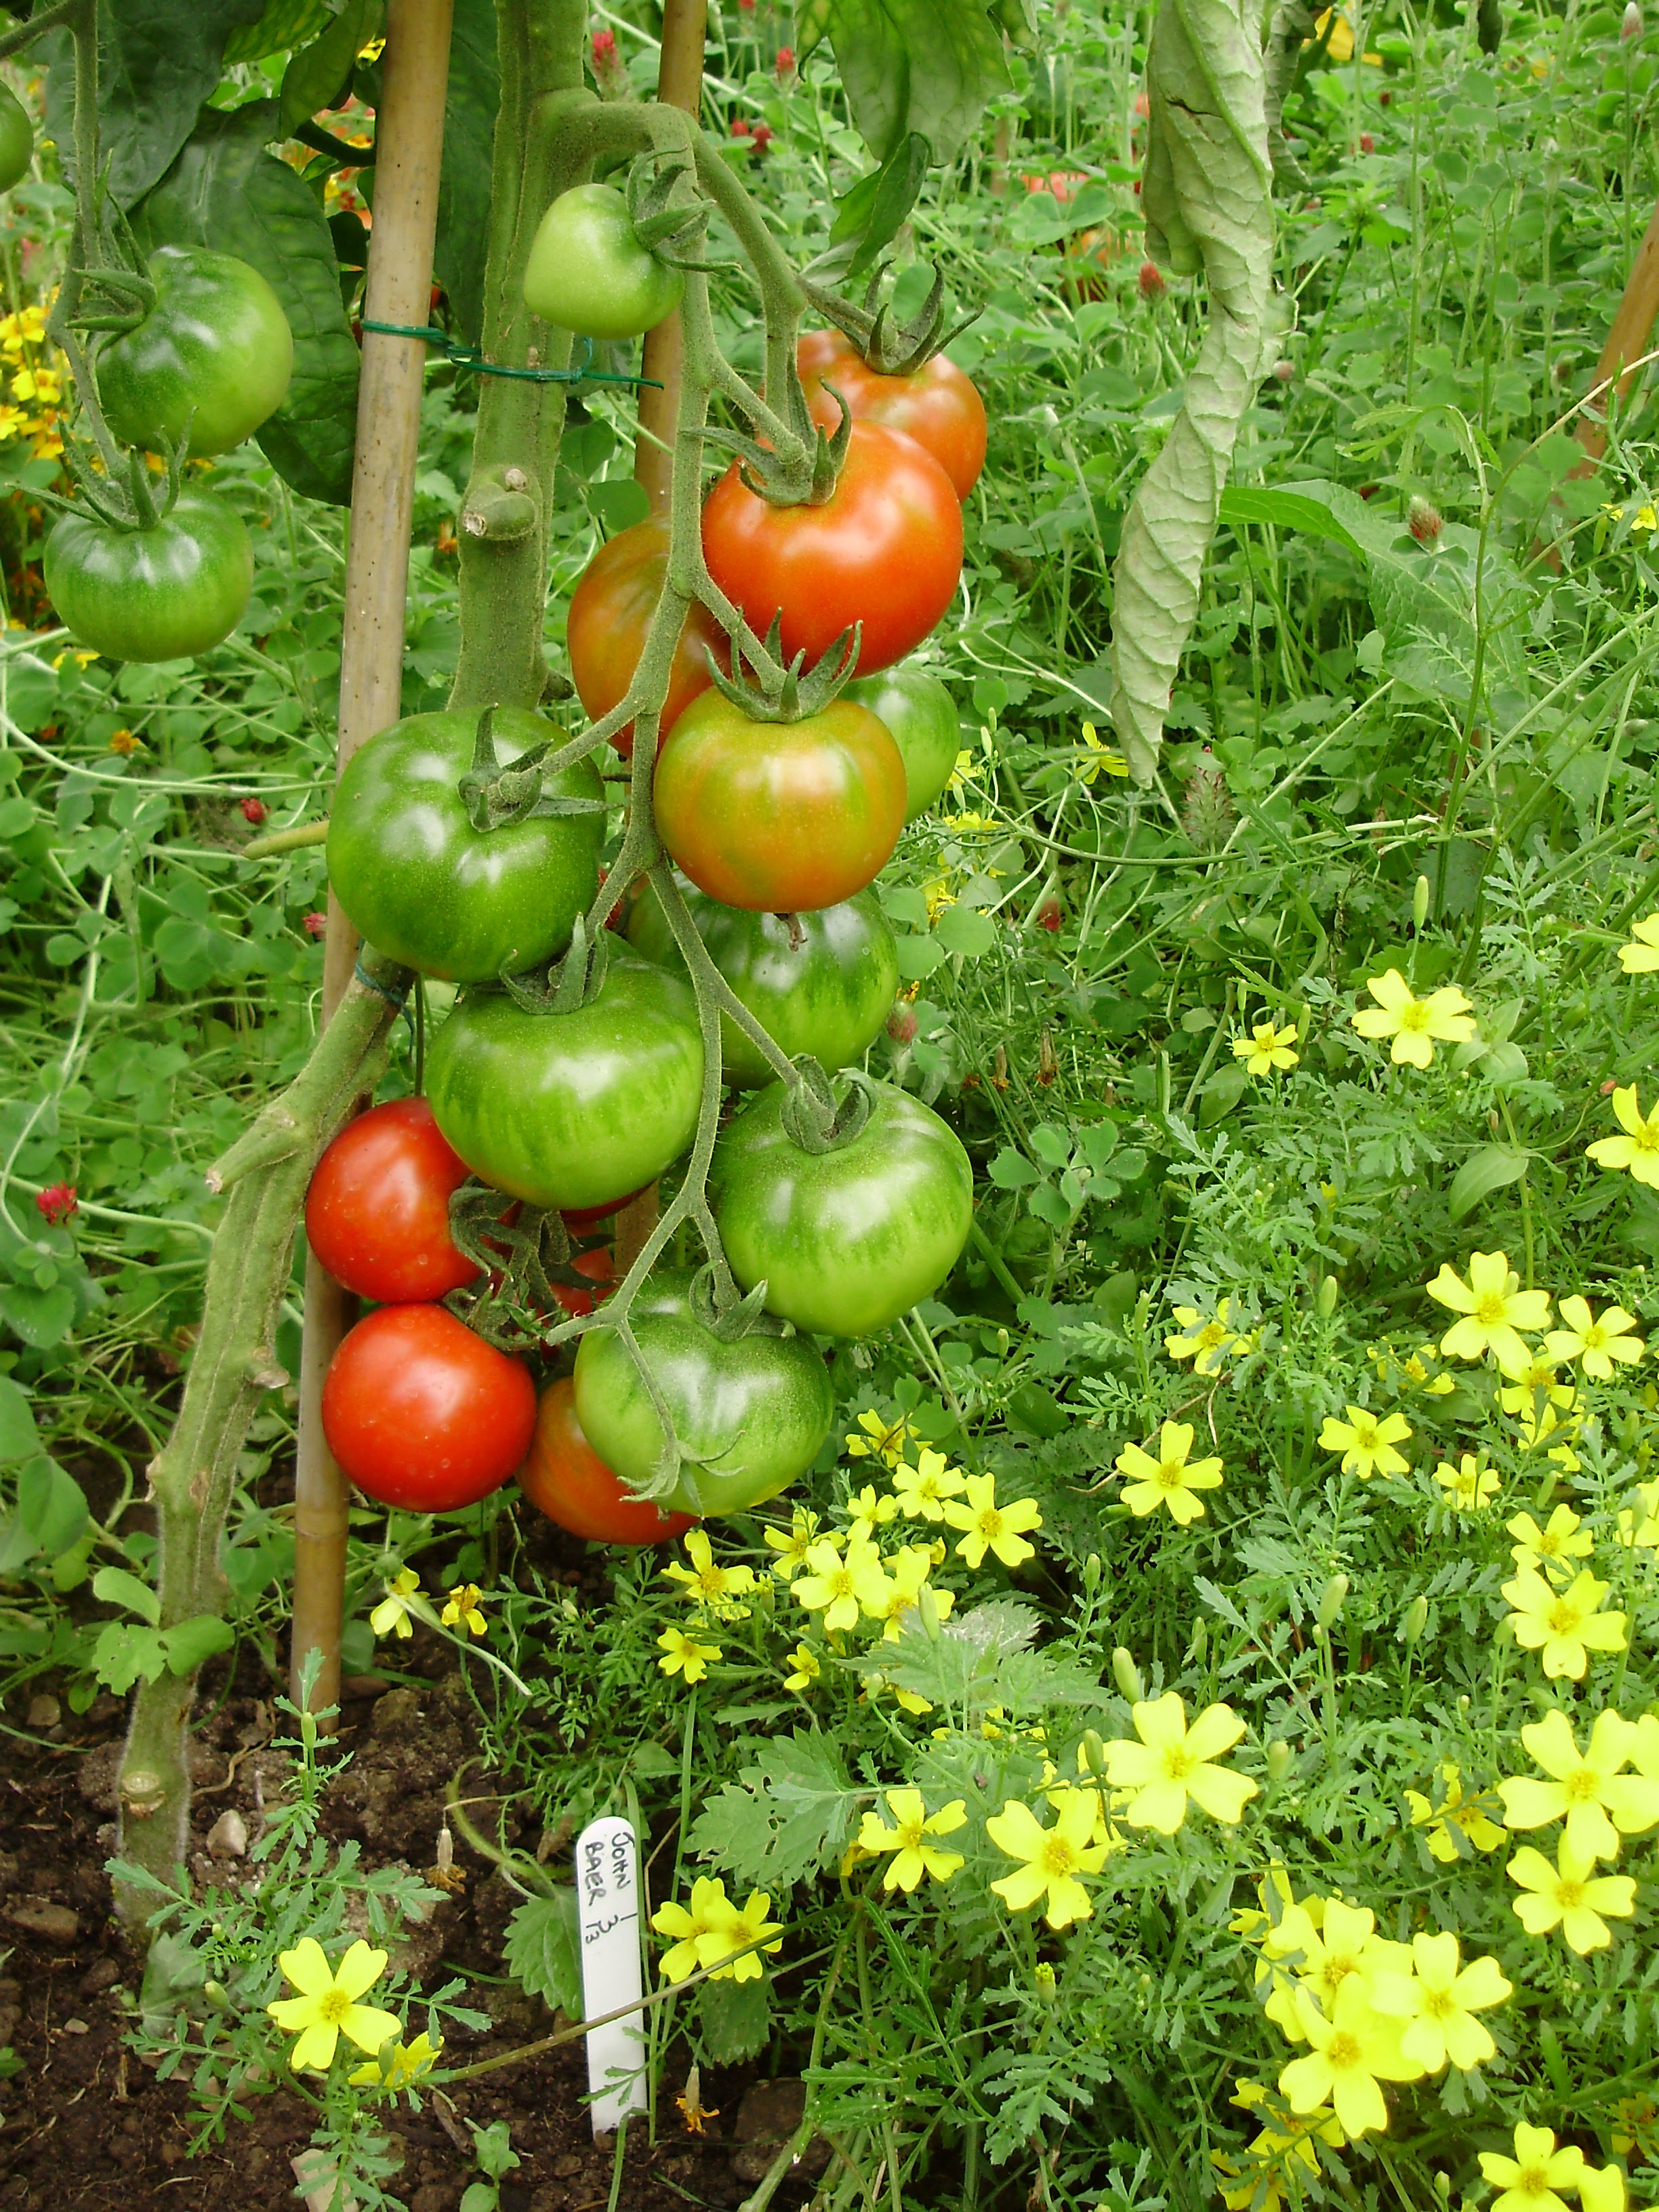 Tomato 'John Baer' - very early, productive & best flavoured medium classic type